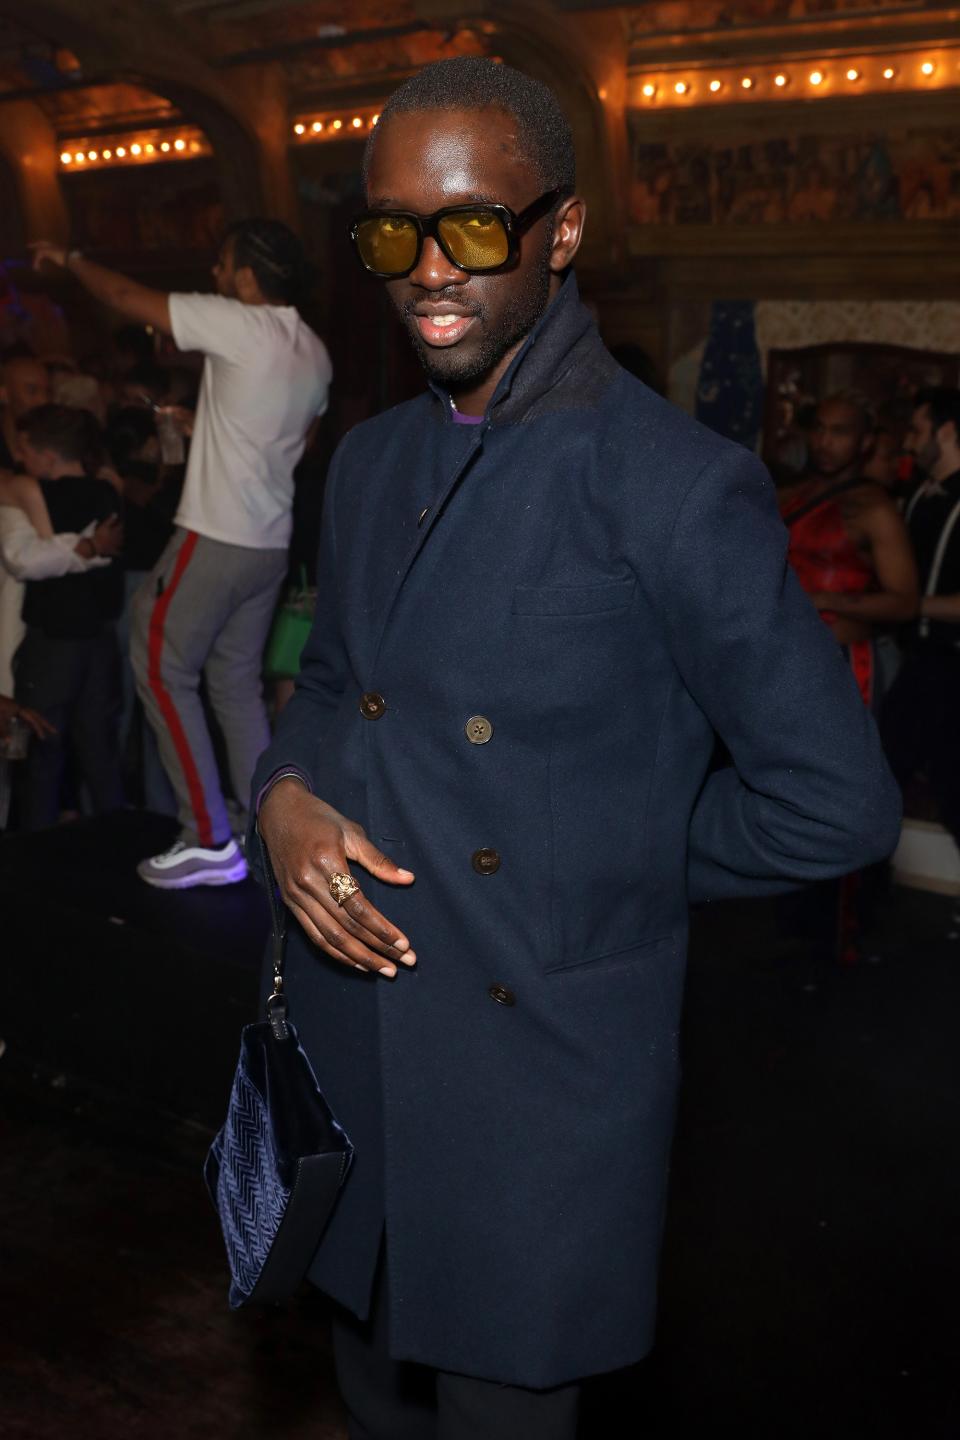 Wilson Oryema attends the adidas Originals Meets Fiorucci launch party in partnership with Dazed, at The Box Soho